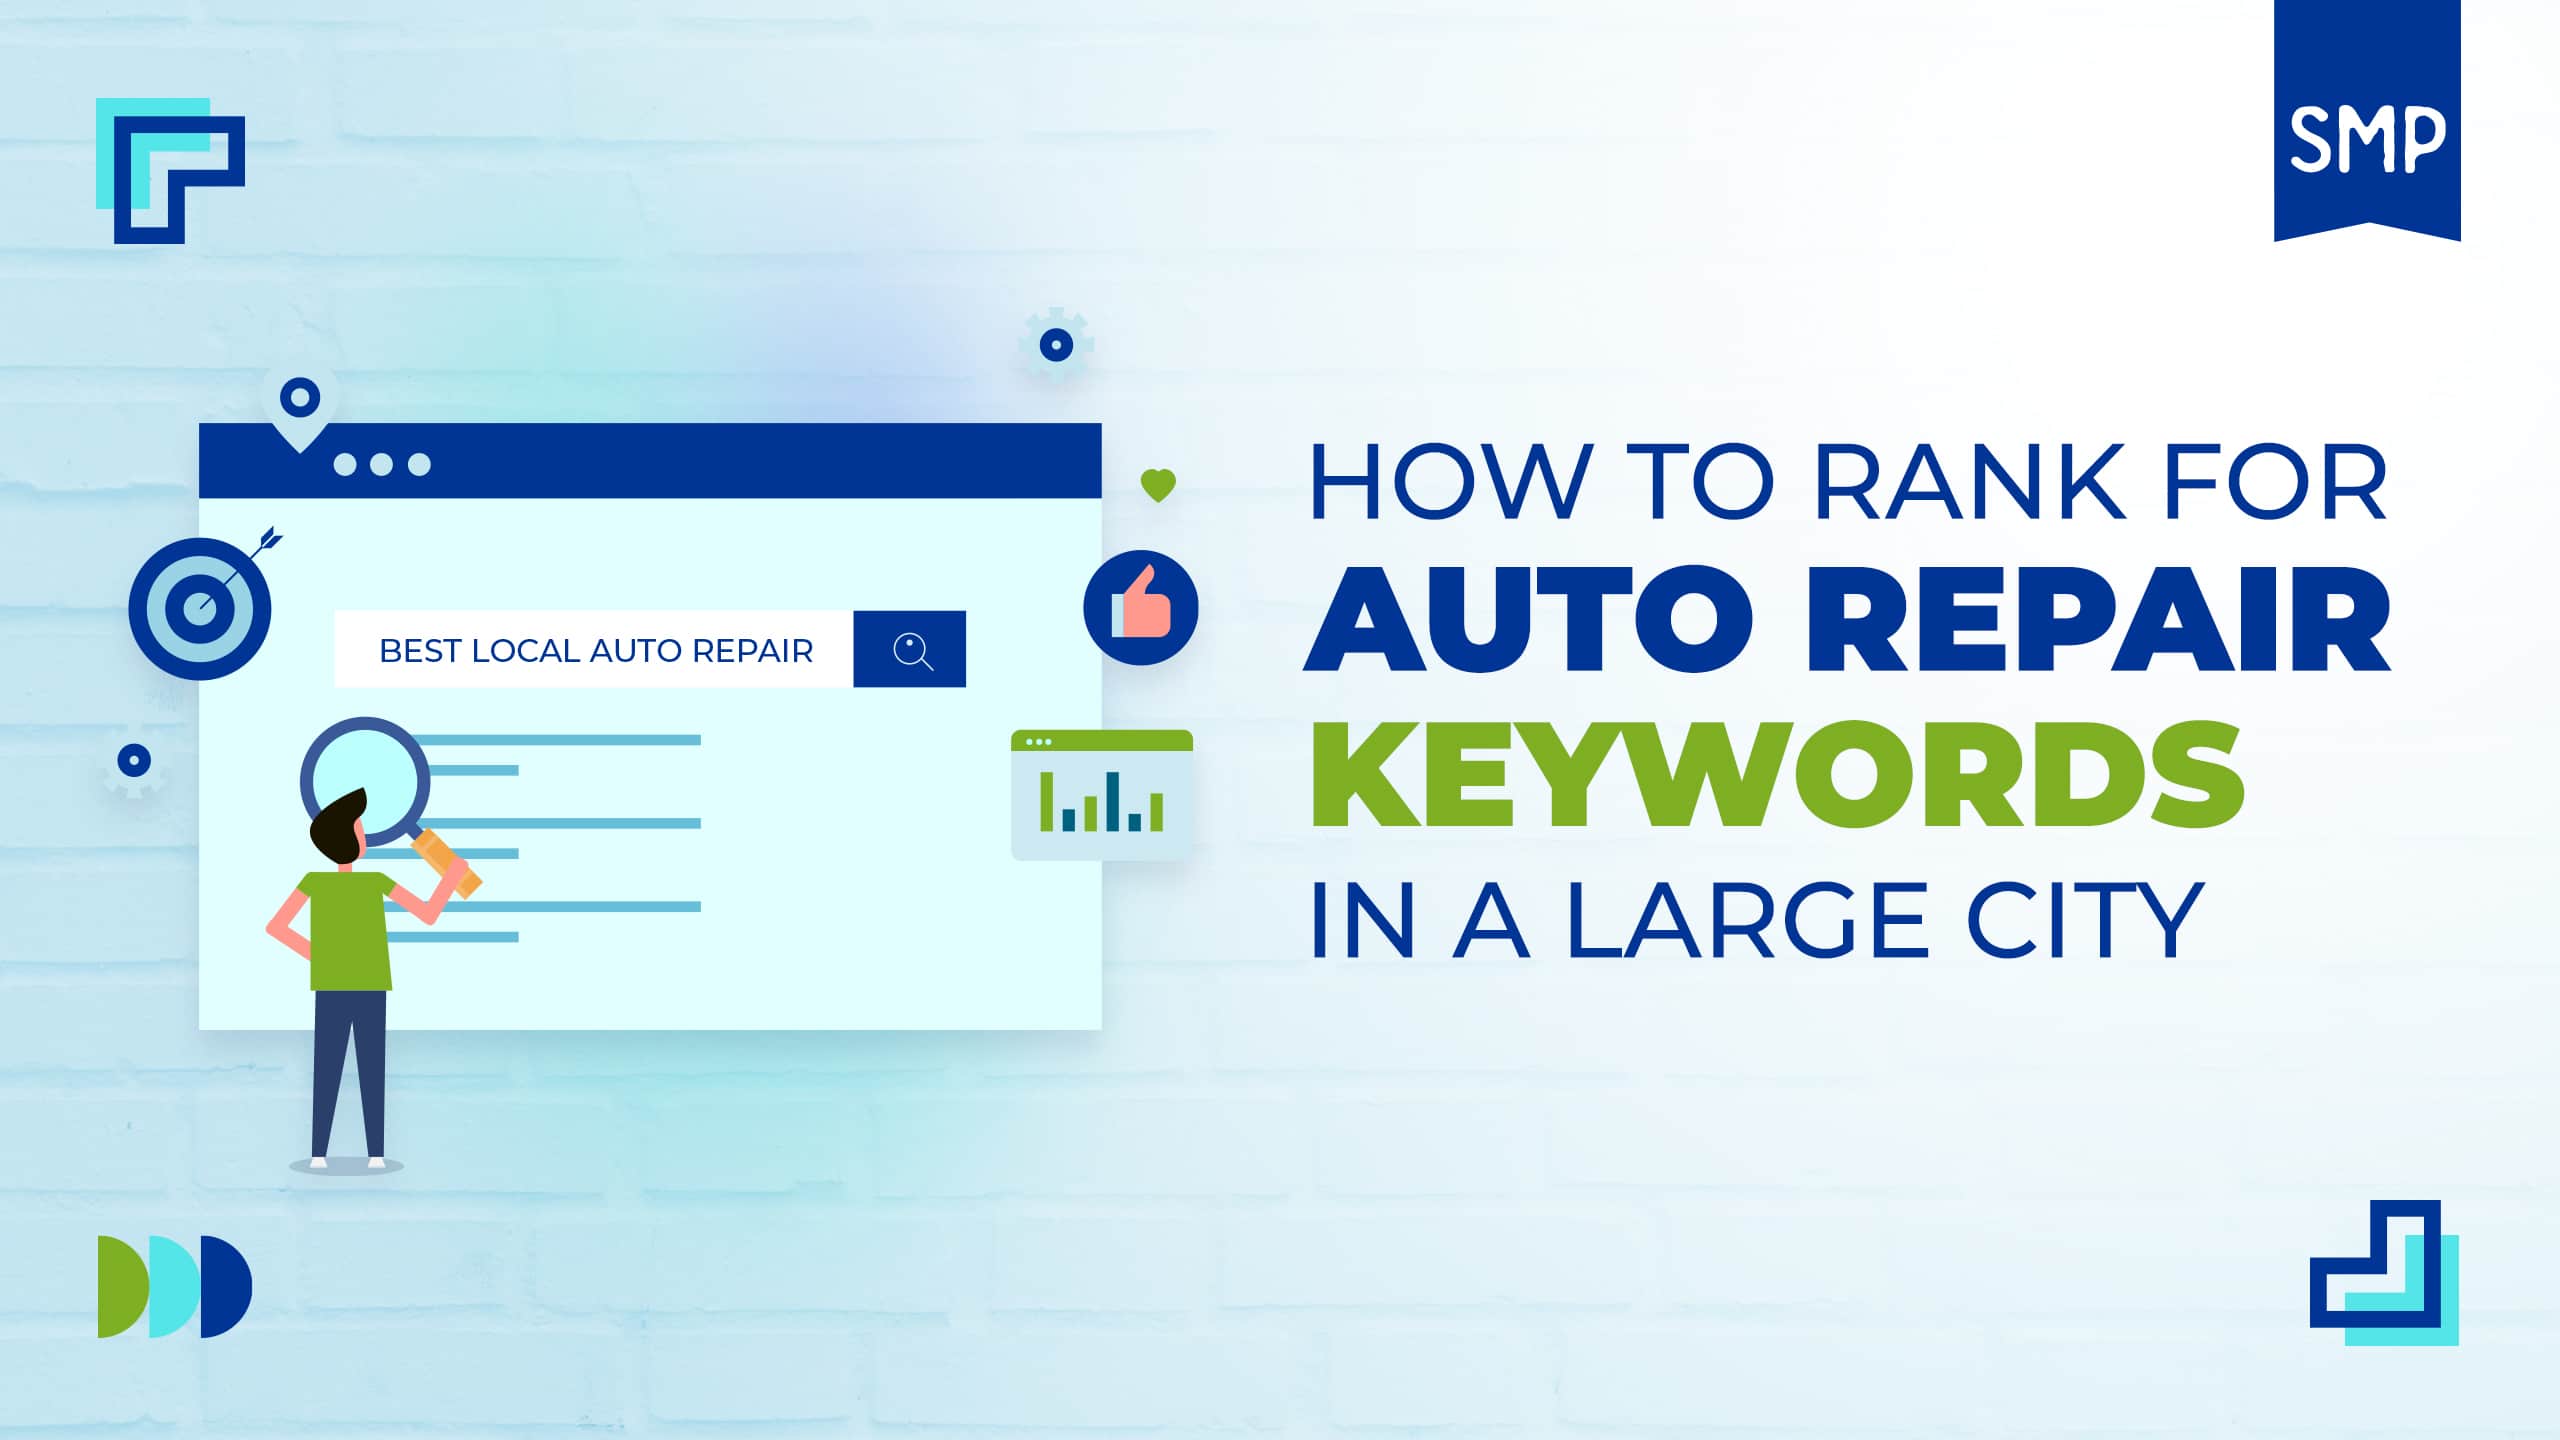 Graphic for a blog on "How To Rank For Auto Repair Keywords In A Large City," featuring a light background with blue and green text.